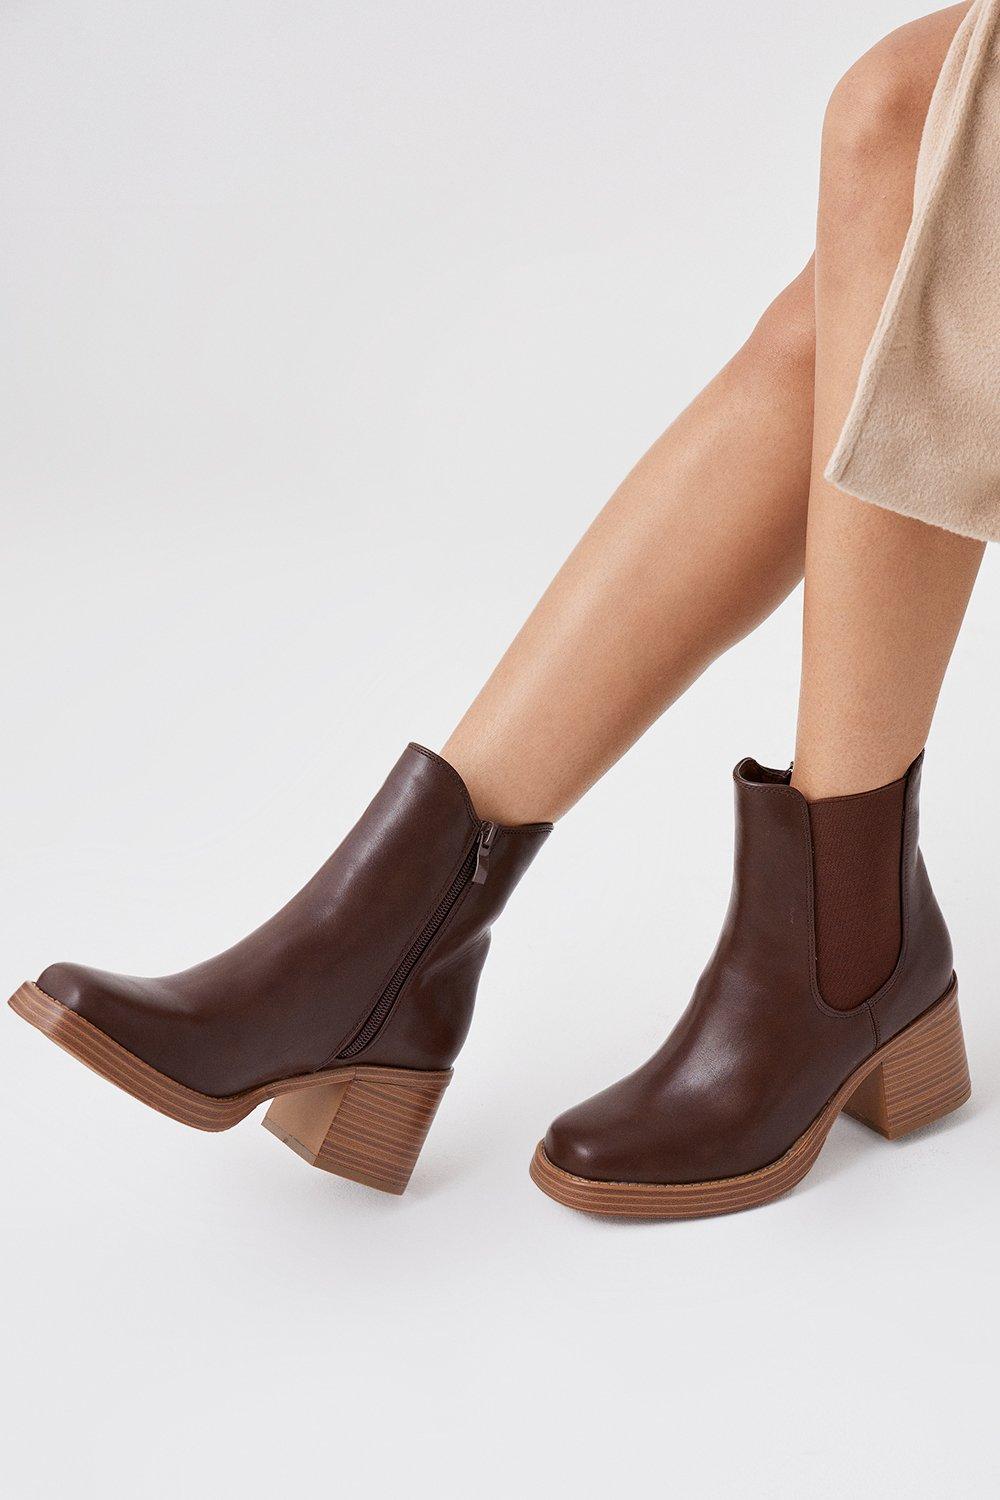 Women’s Faith: Alberta Square Toe Stack Heel Ankle Boots - brown - 4